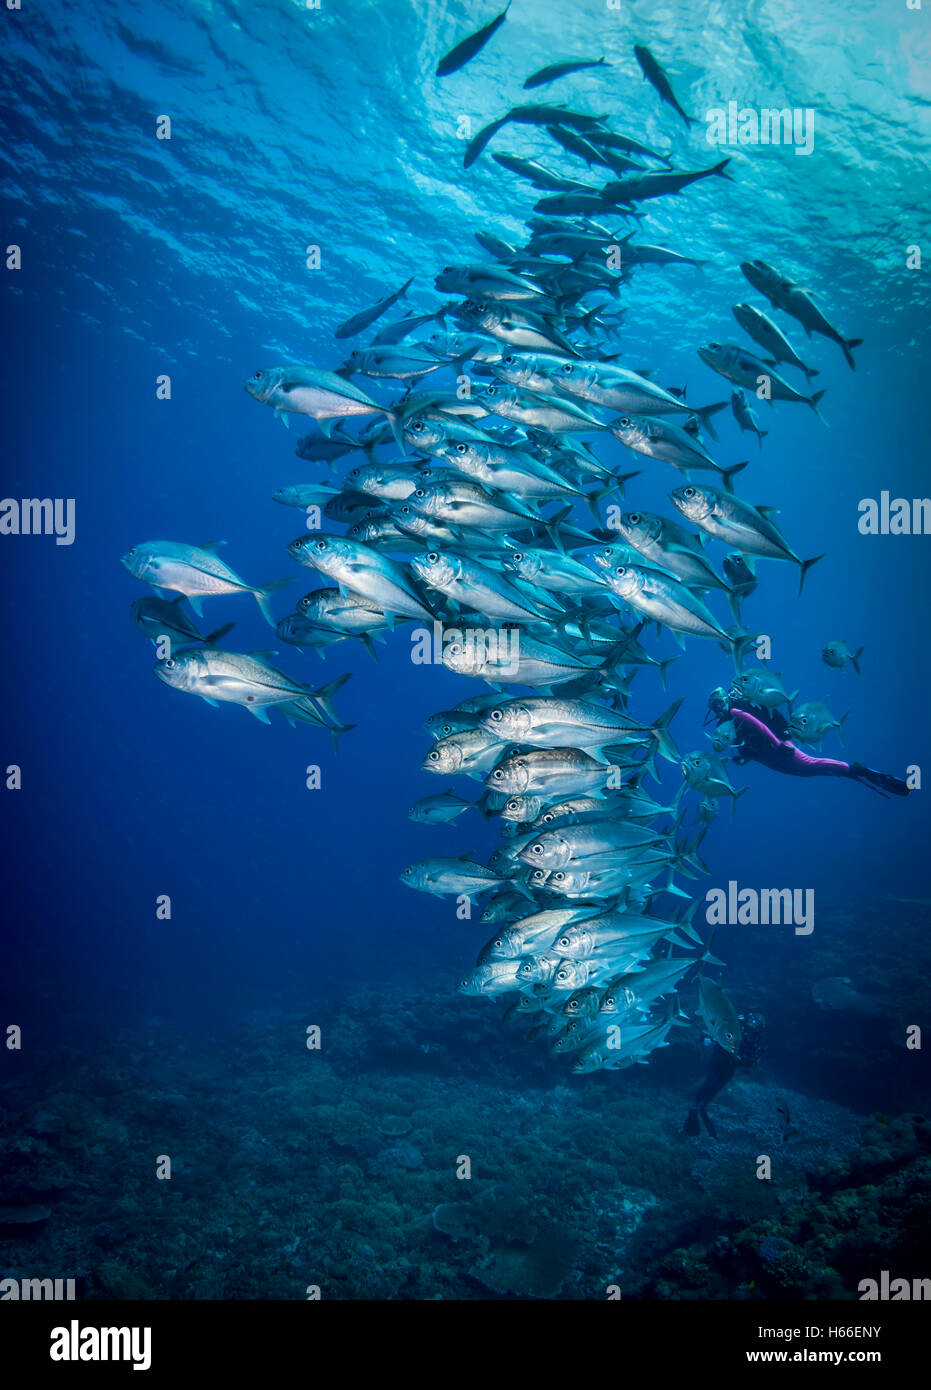 Schooling bigeye jacks or trevallies (Caranx sexfaciatus) on coral reef with rays of sunshine from the surface Solomon Islands Stock Photo